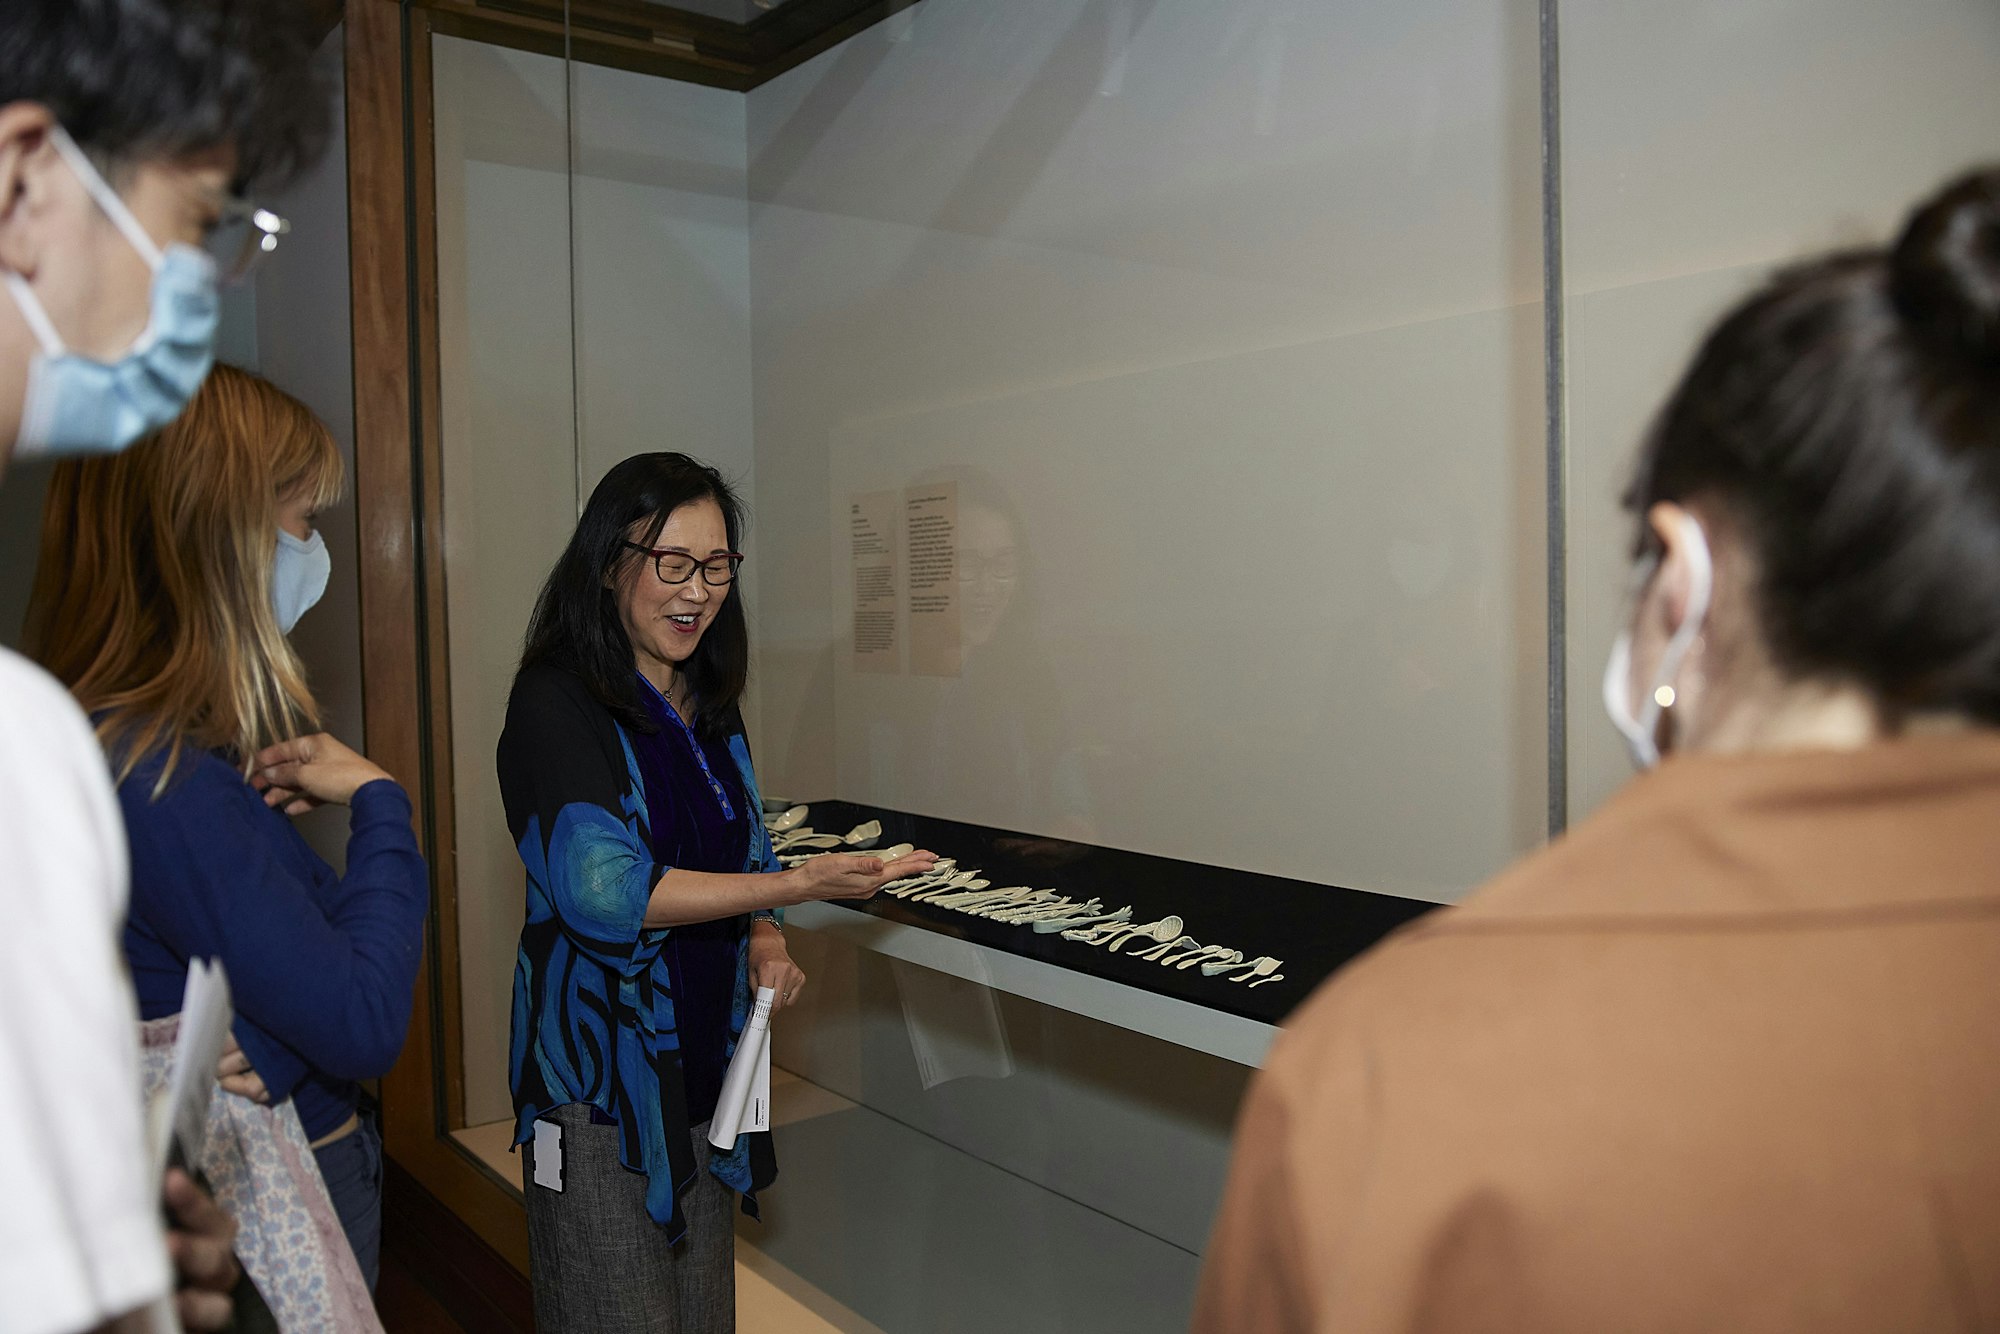 Yin Cao, the Gallery’s curator of Chinese Art, discusses The way we eat by Liu Xiaoxian.